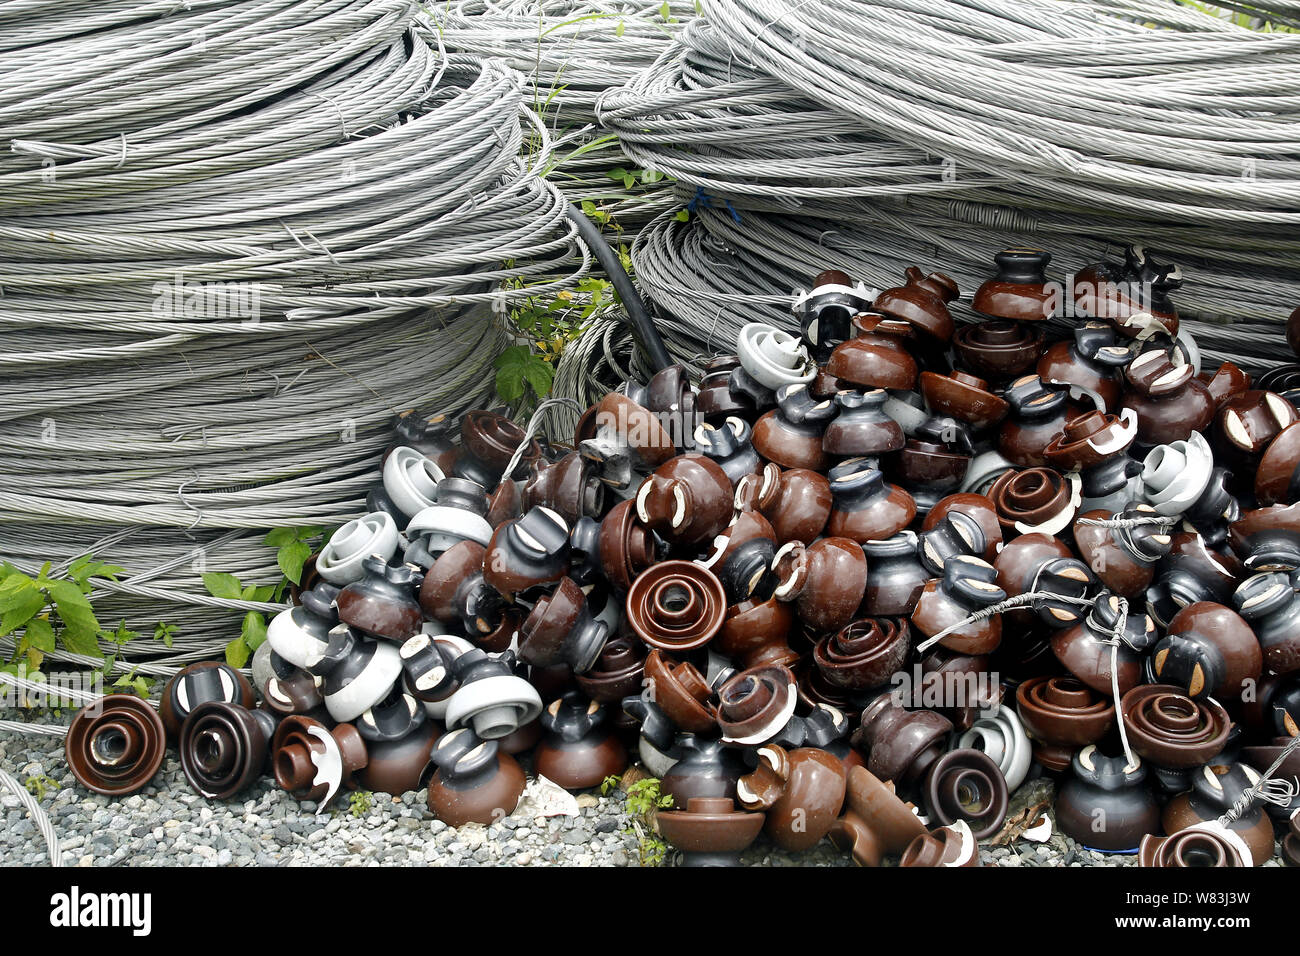 Photo of rolls of metal or steel cables and insulators used for electric poles at an industrial yard Stock Photo